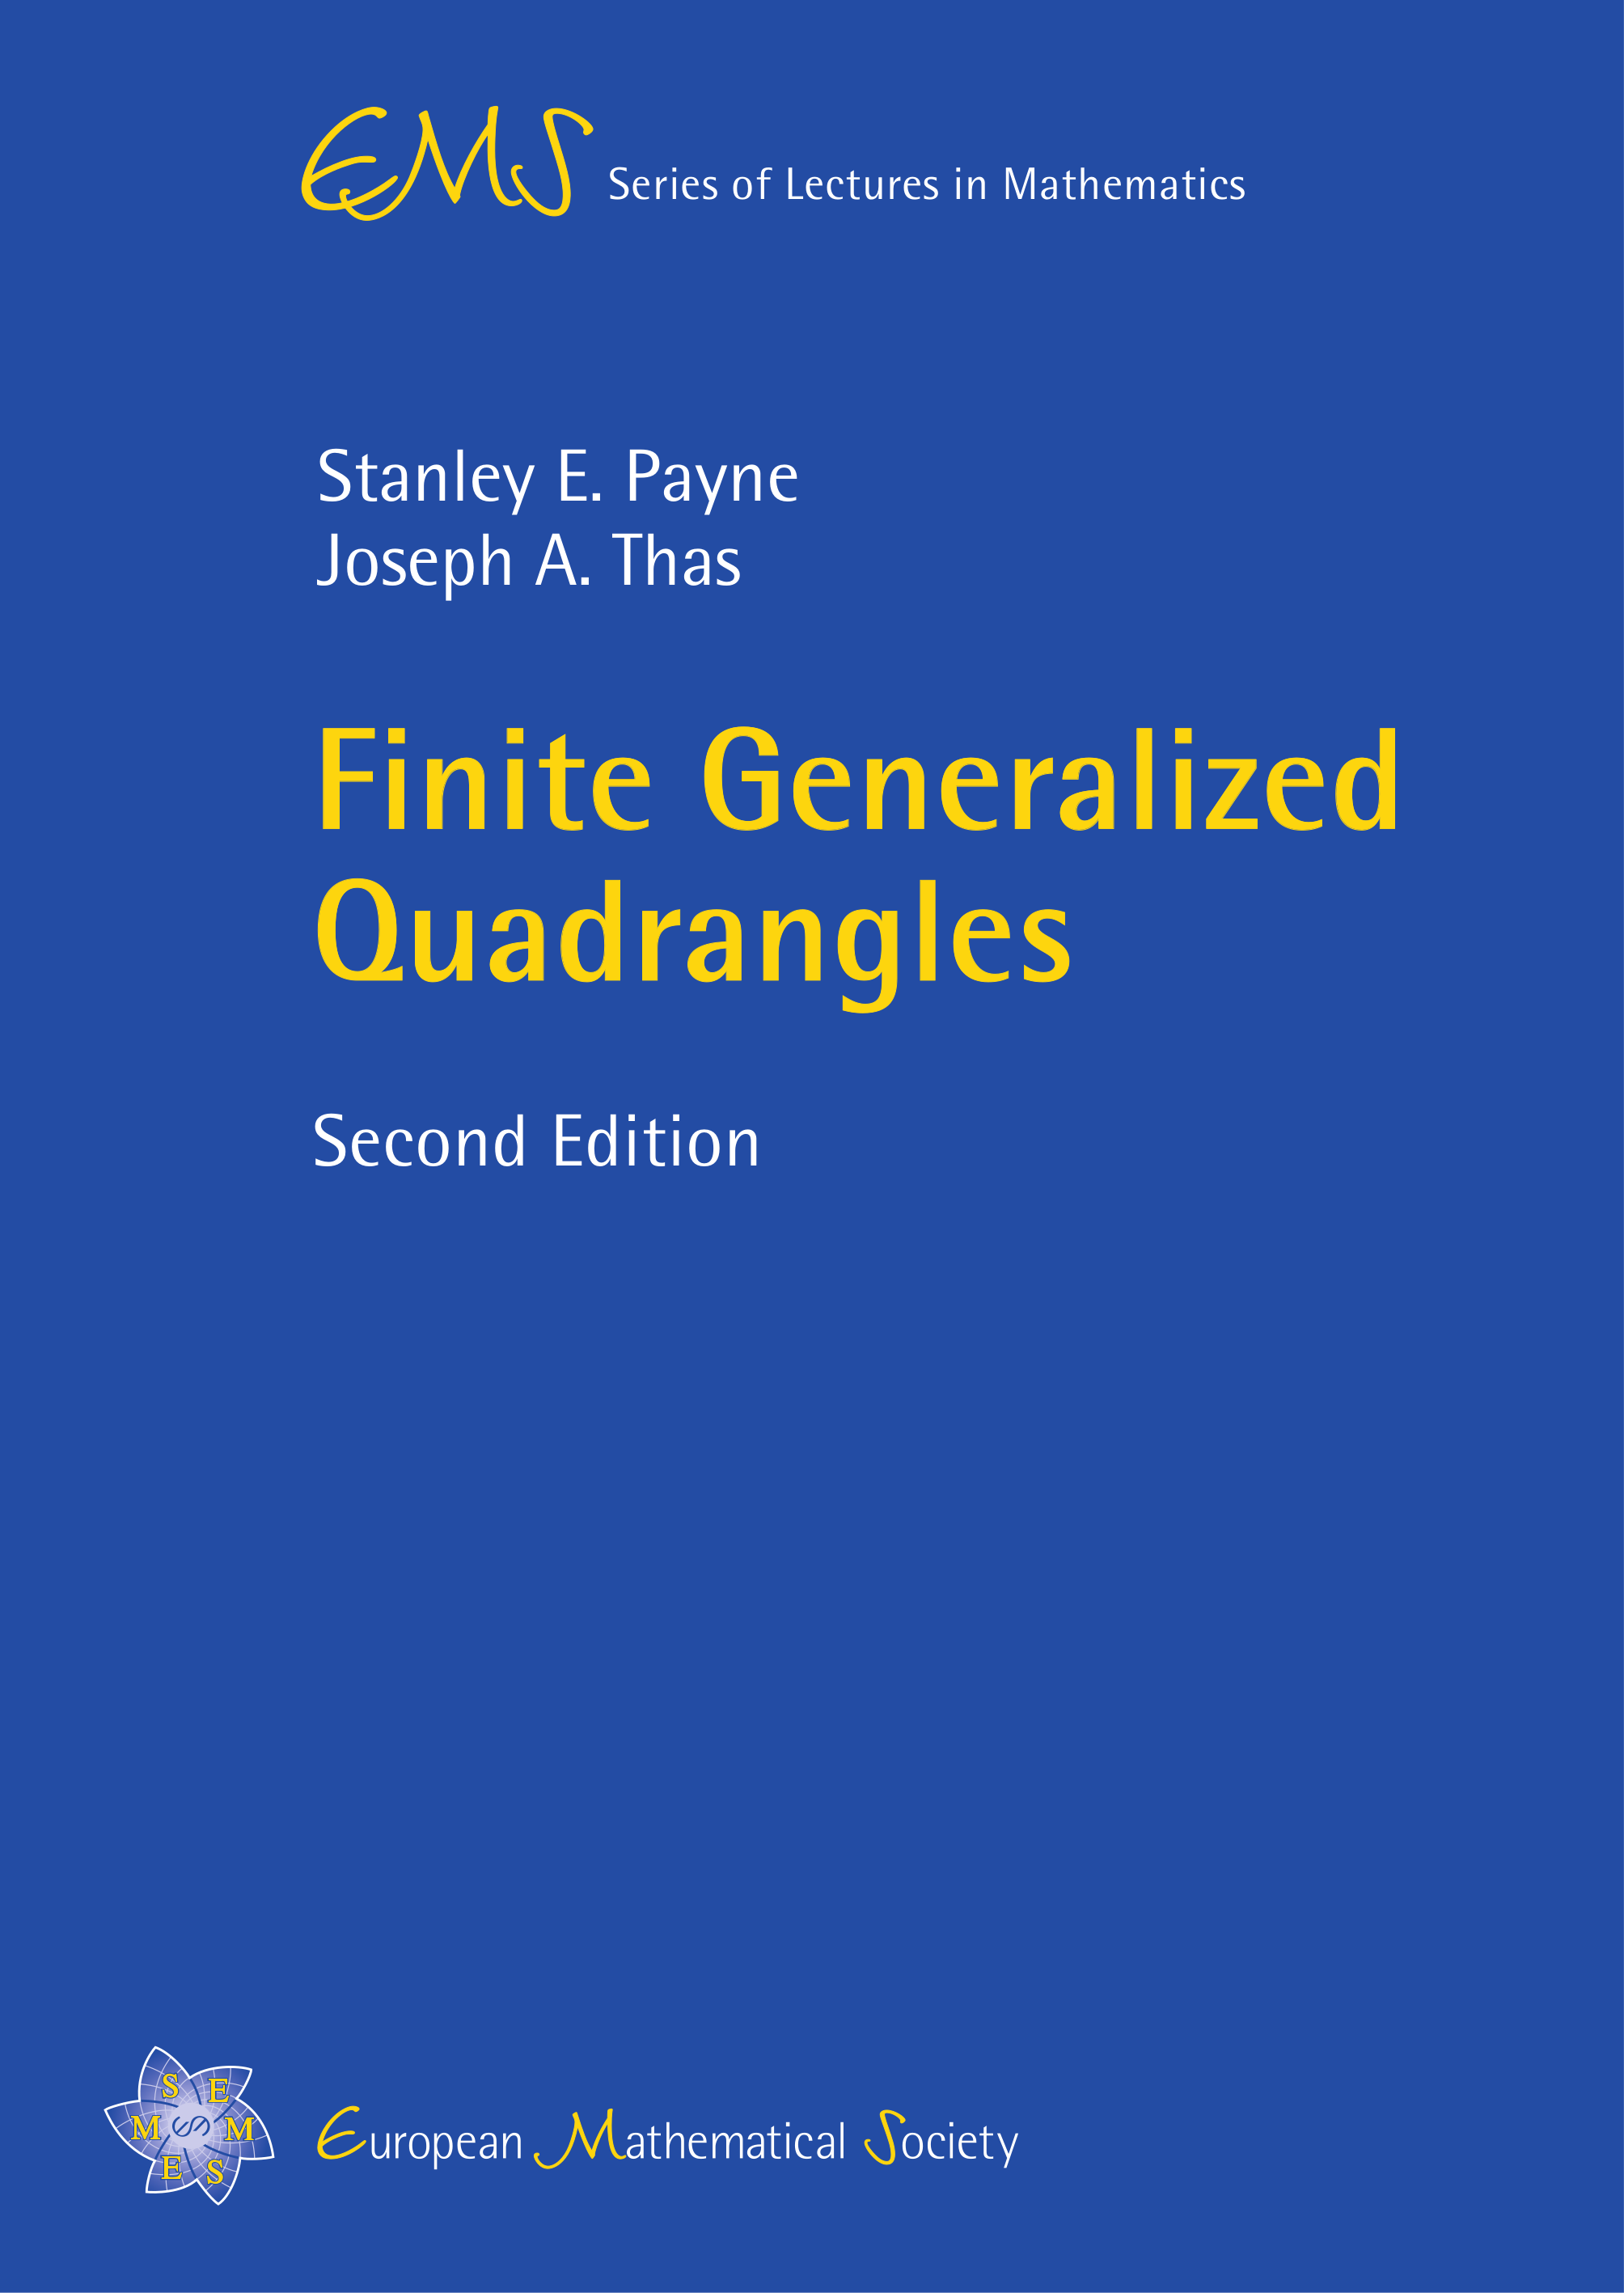 Generalizations and related topics cover